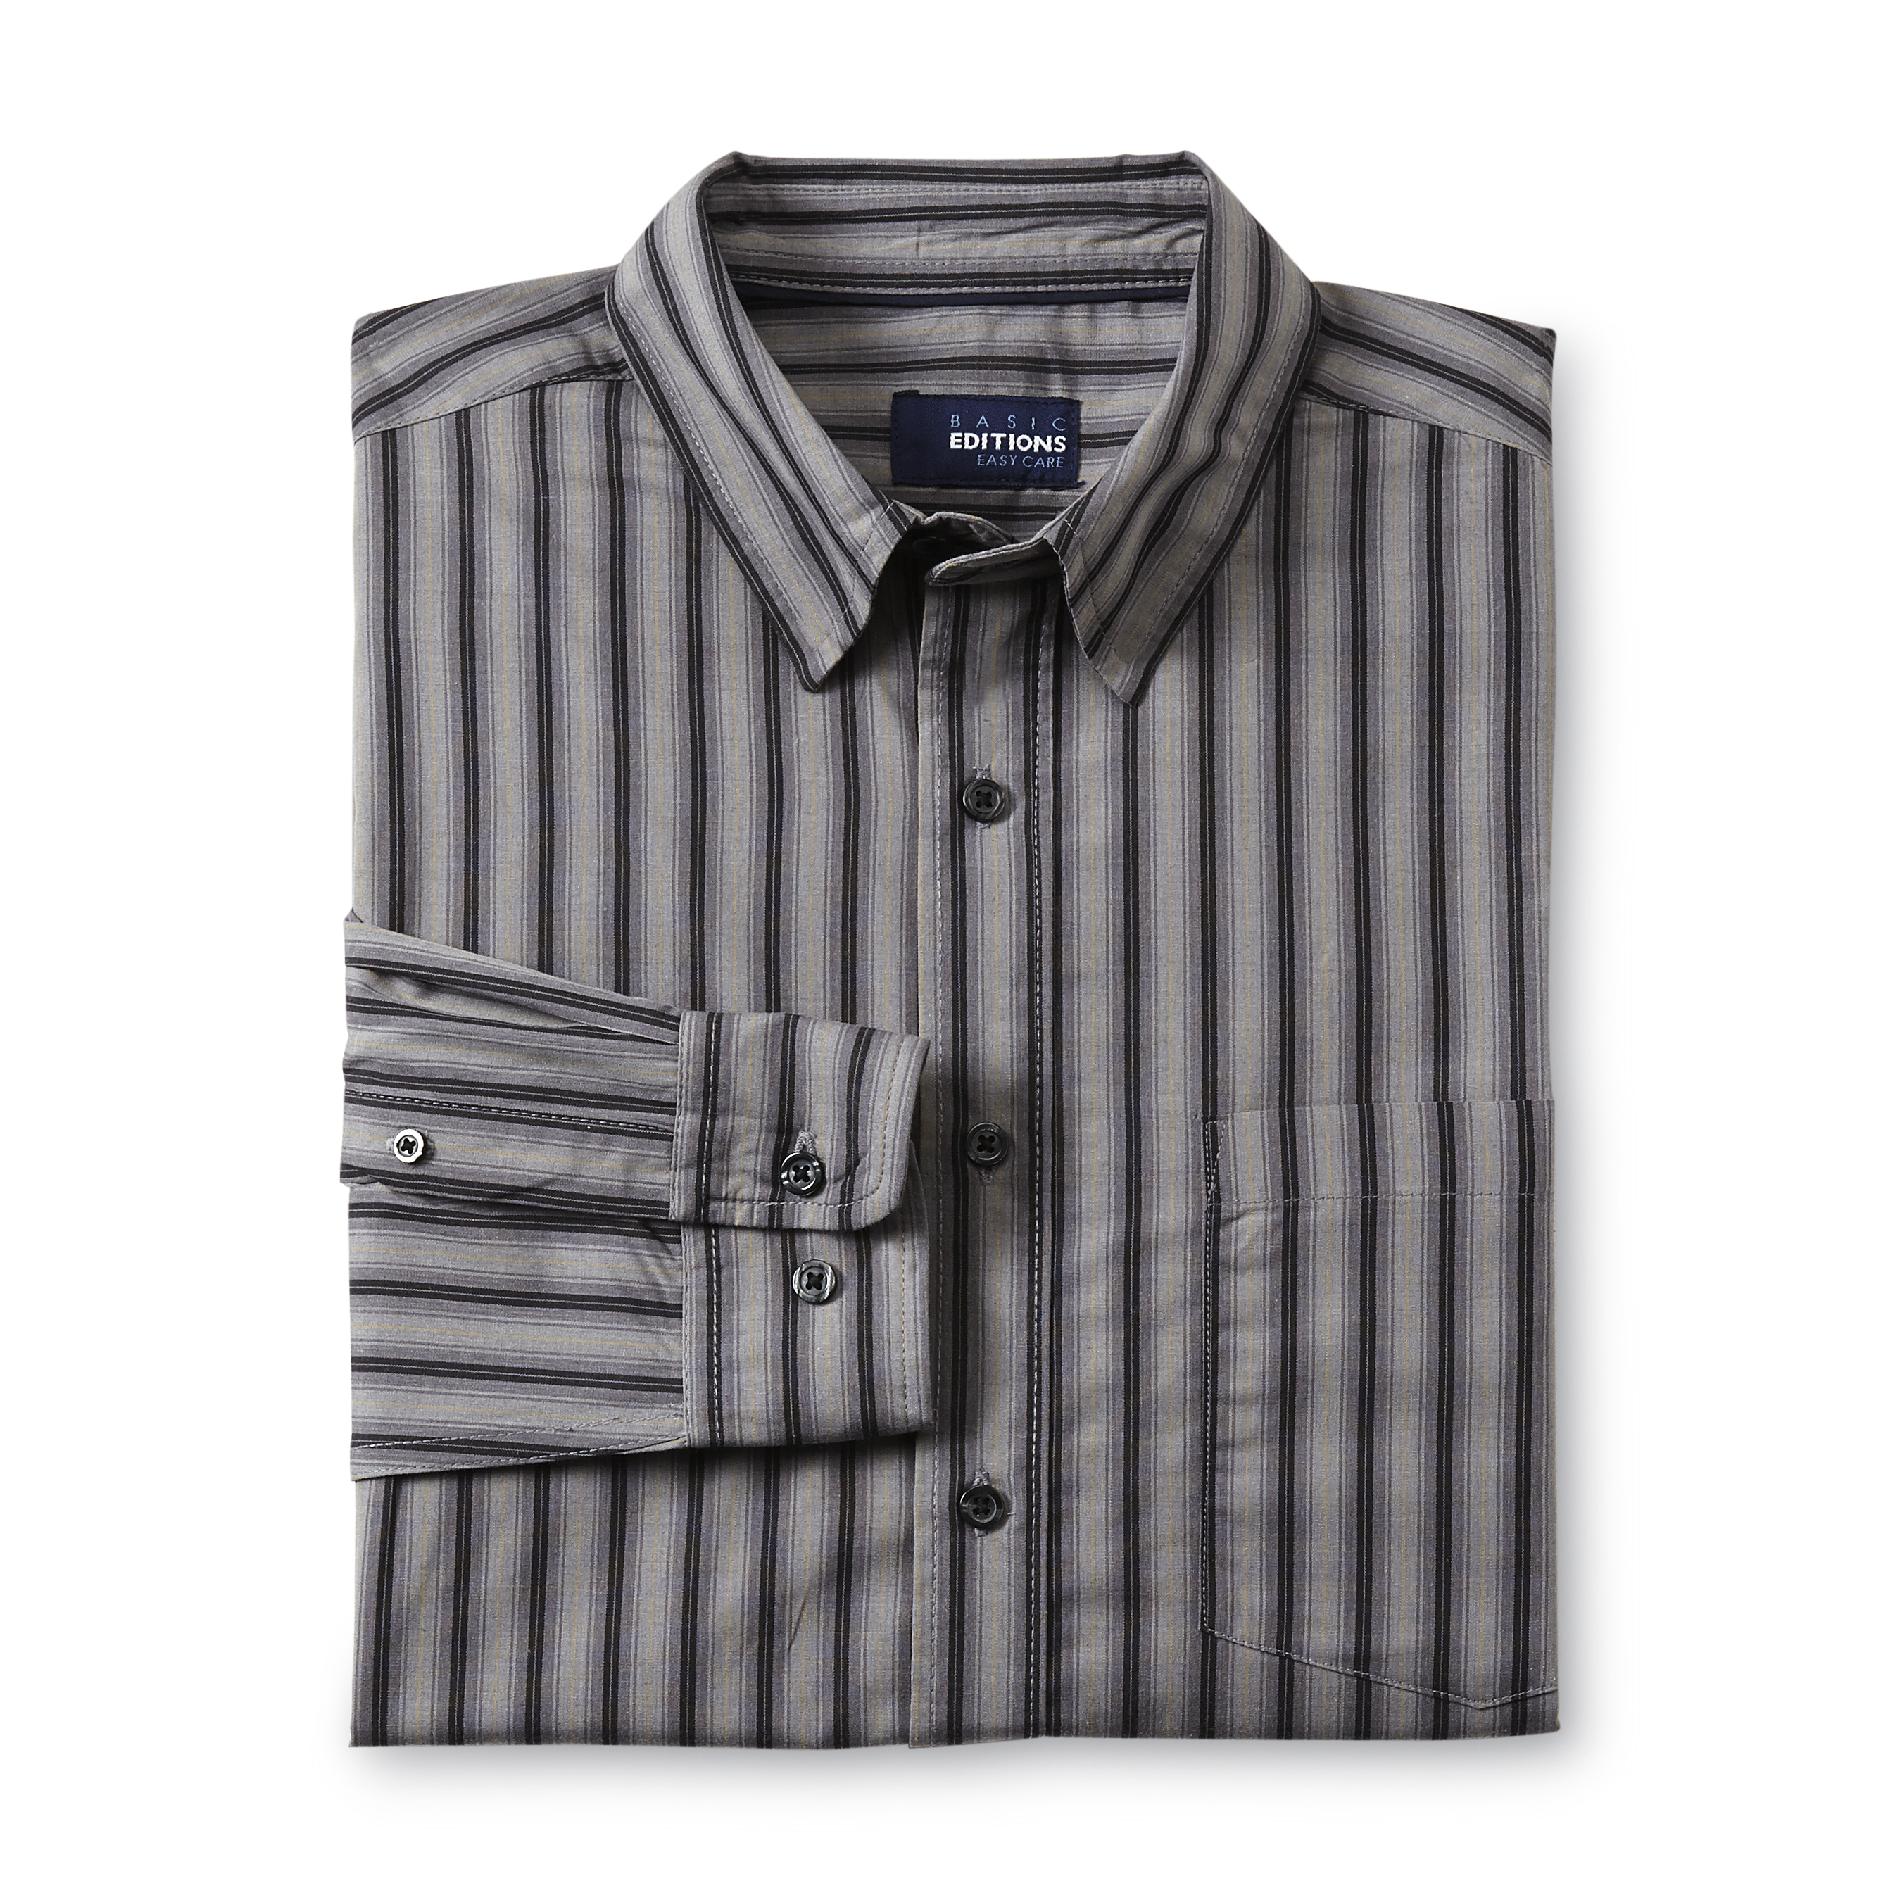 Basic Editions Men's Big & Tall Easy Care Dress Shirt - Striped